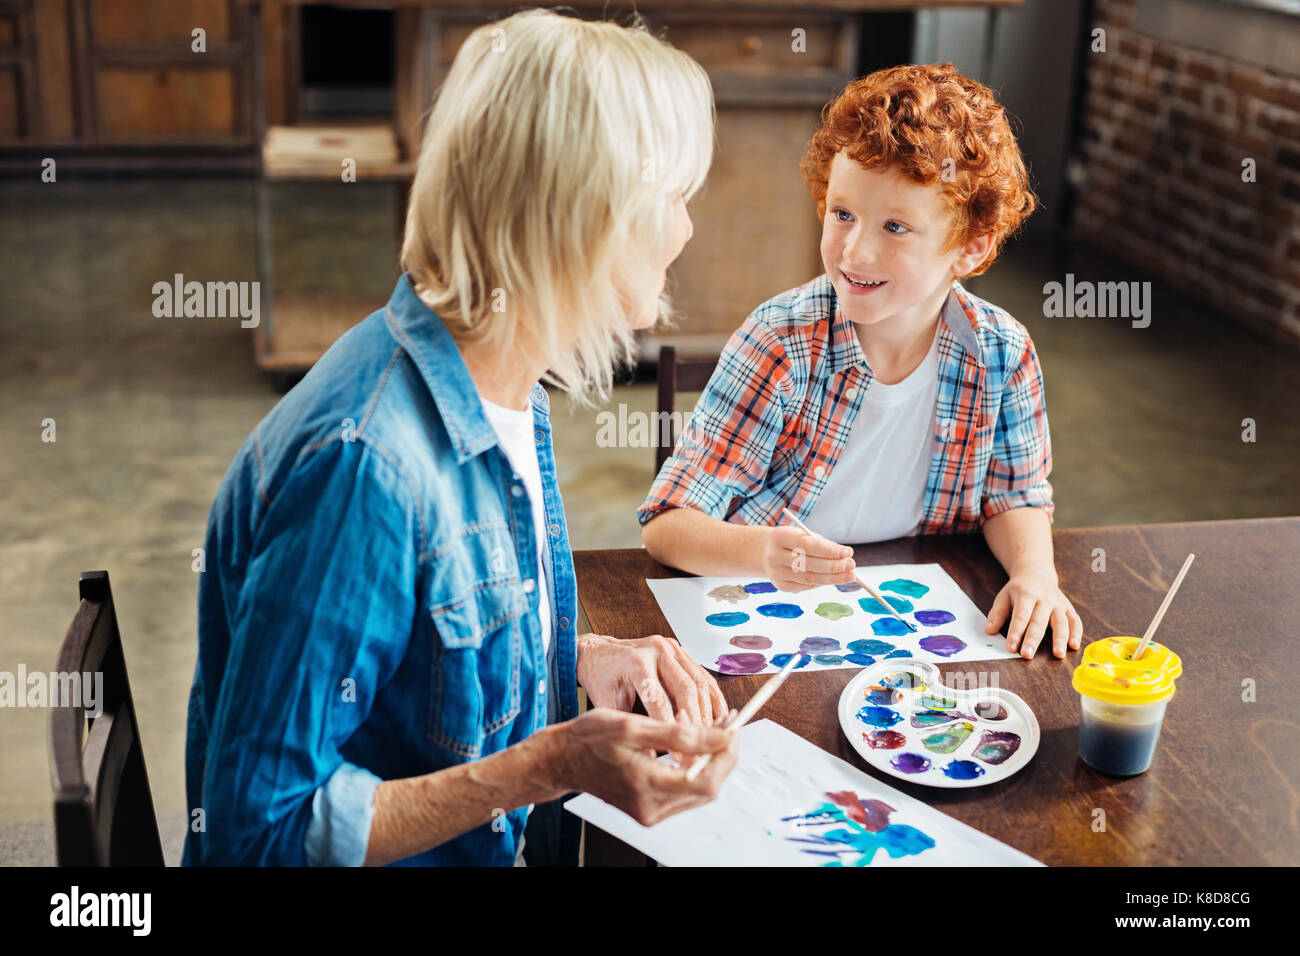 Adorable blue eyed kid gossiping with grandma Stock Photo